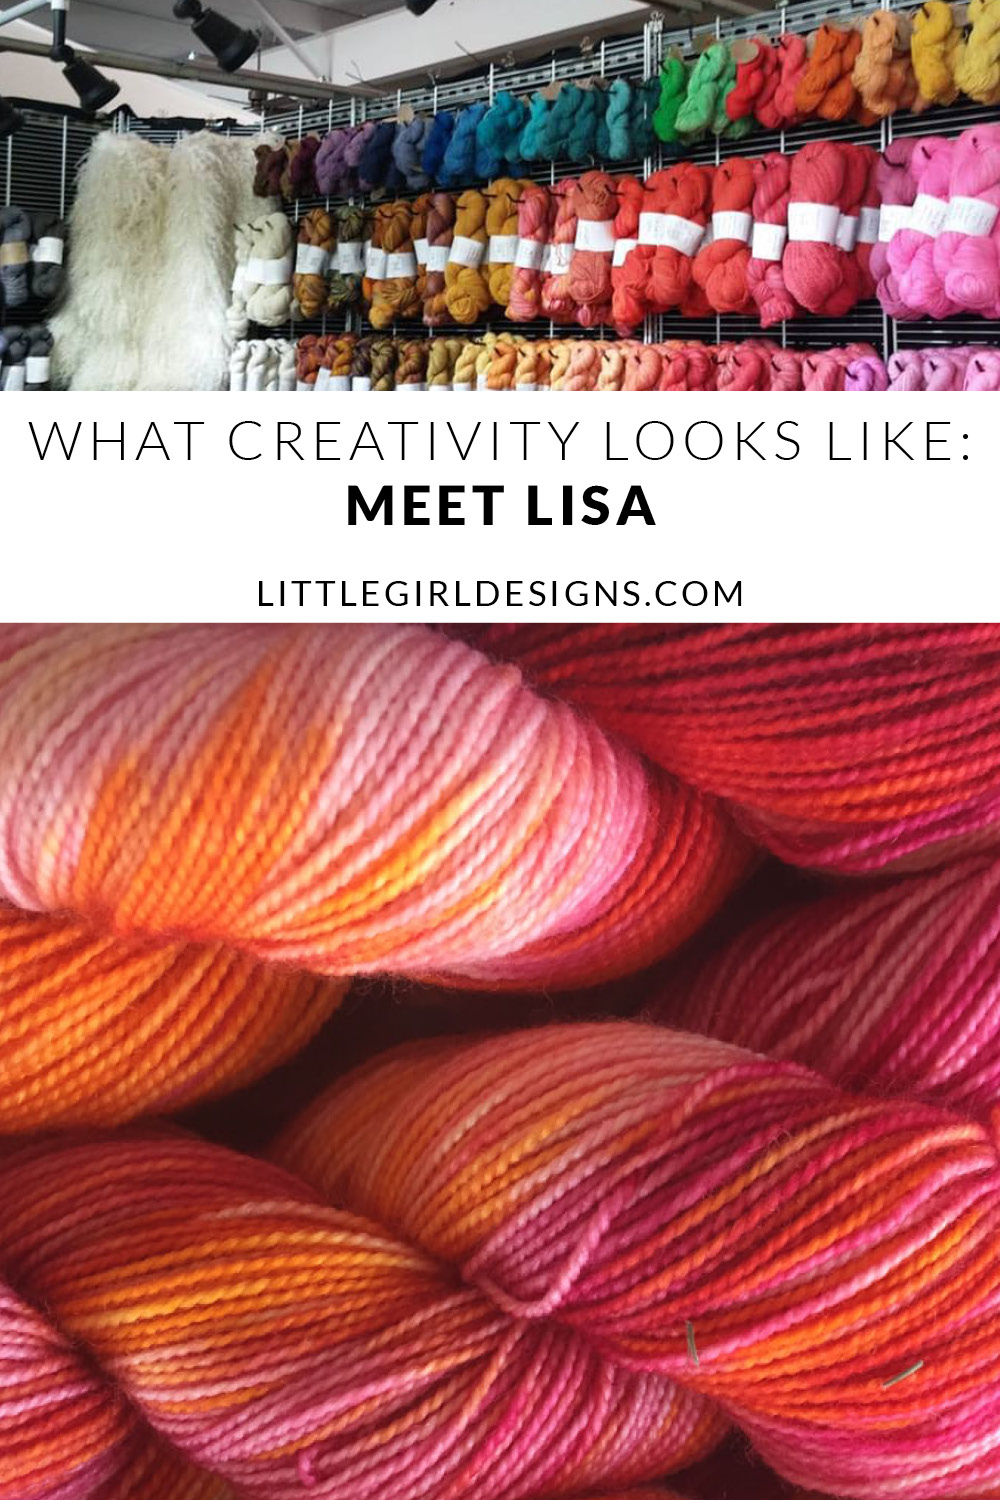 This week, I'm chatting with Lisa from Flying Goat Farm. She's an amazing person who makes gorgeous yarn. Read more about what she thinks creativity looks like when you click this image.